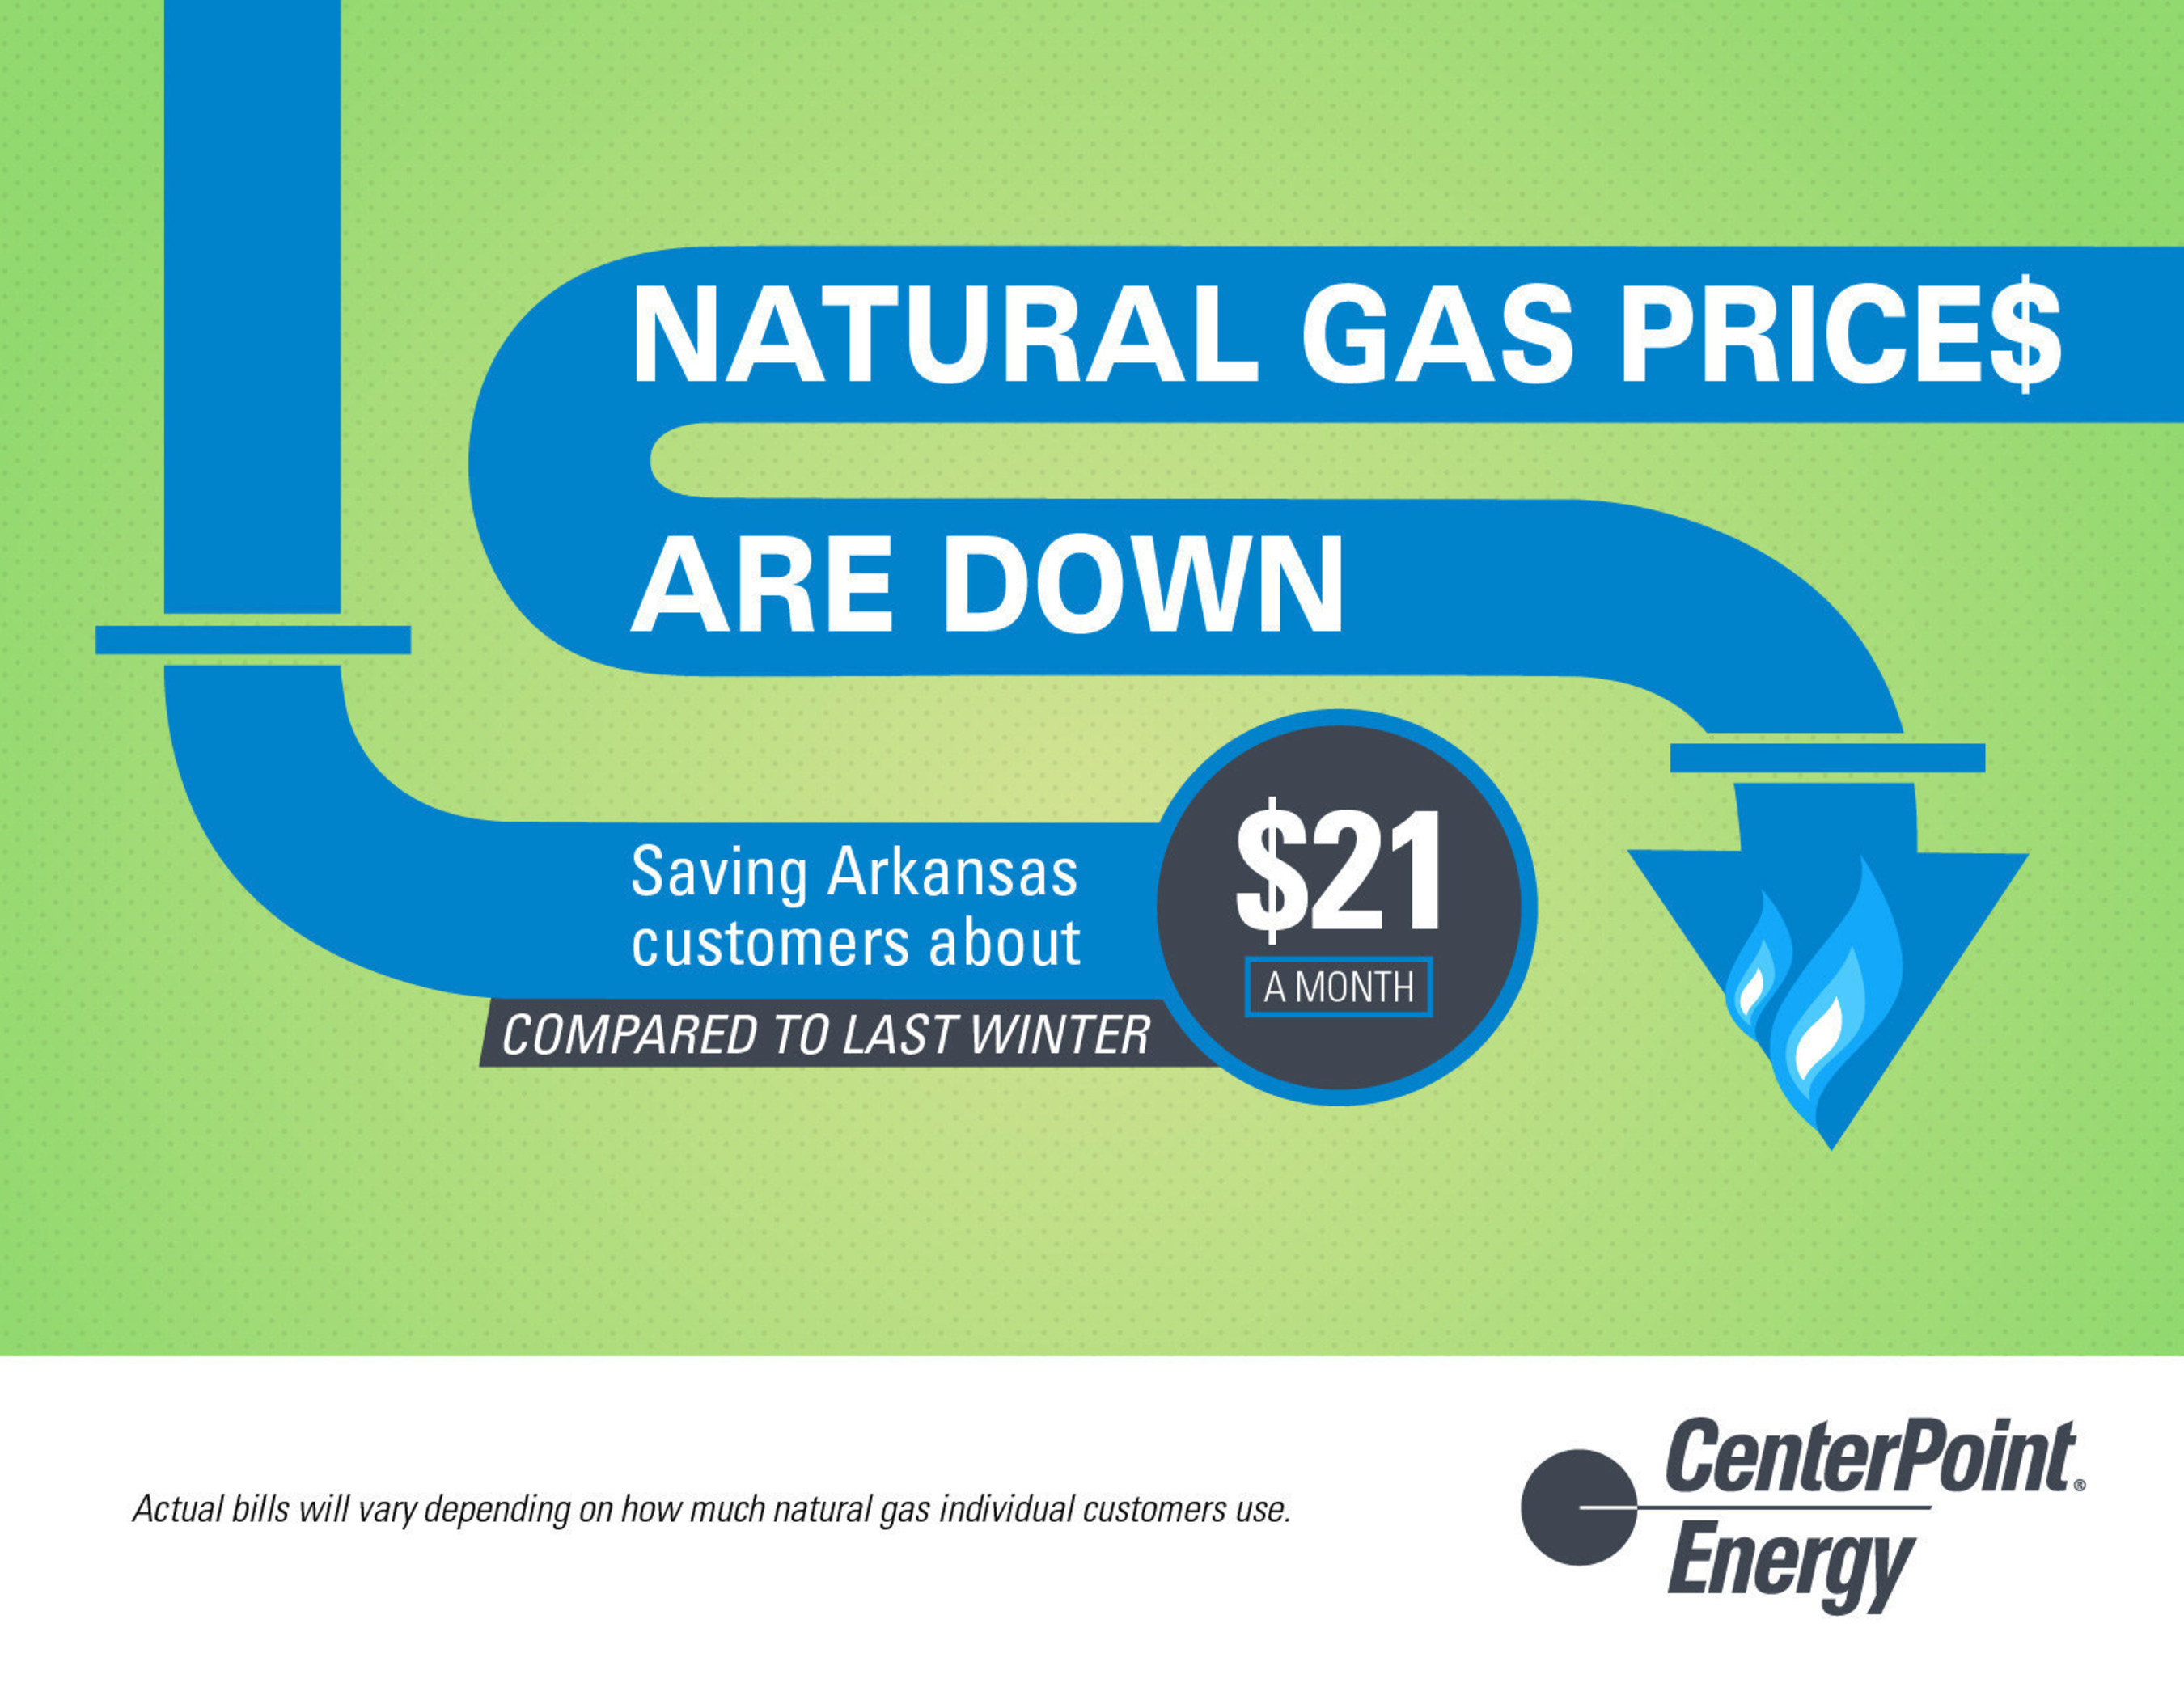 CenterPoint Energy is passing on the second natural gas price decrease this year - just in time for the heating season. Affordable prices continue to make natural gas a smart choice for the home, the budget and the environment.